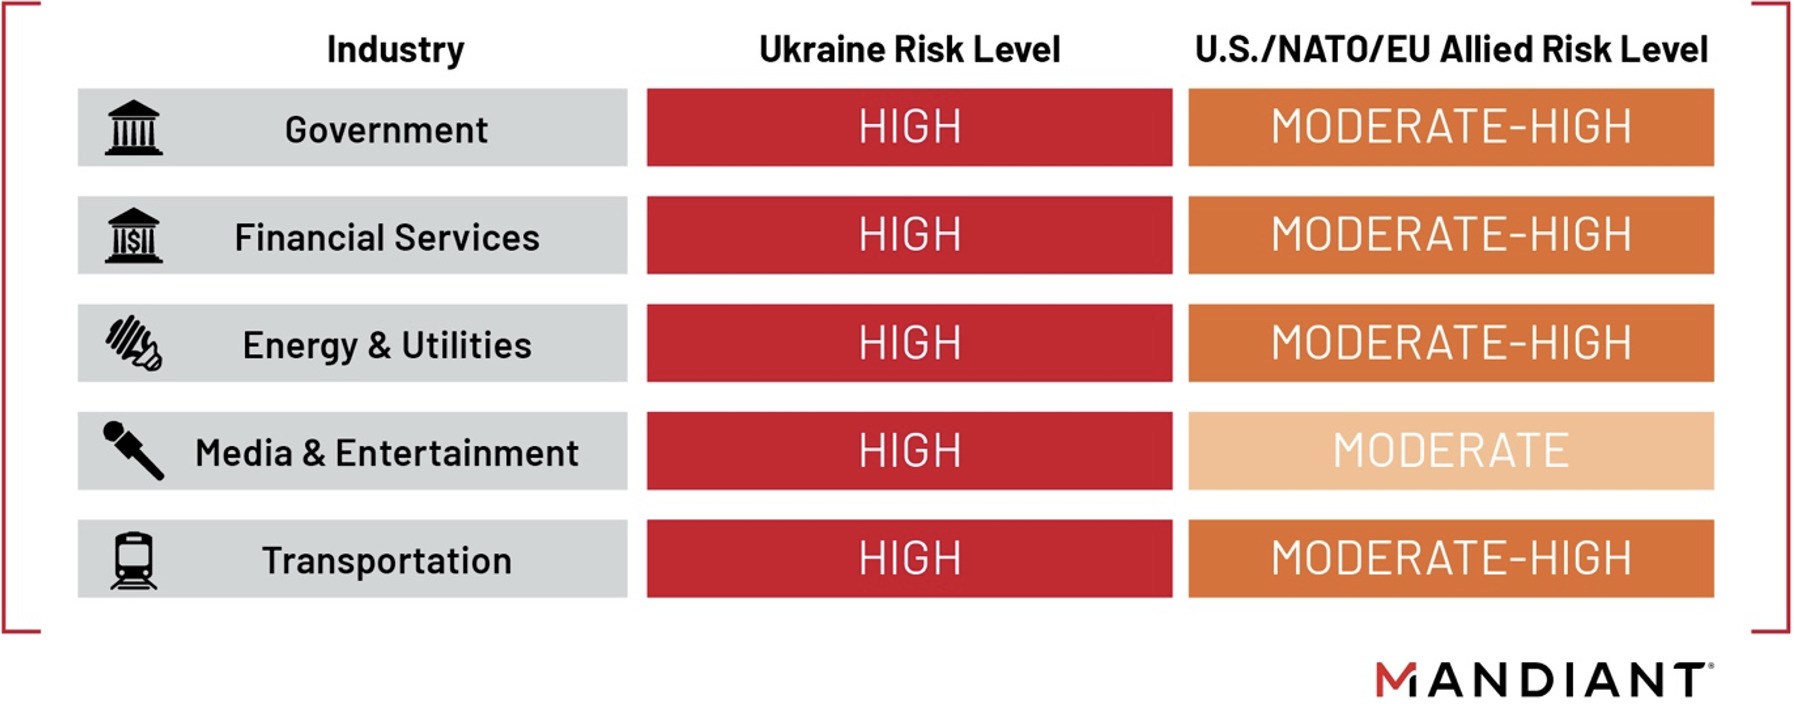 Sectors facing elevated risk from Russian cyber operations